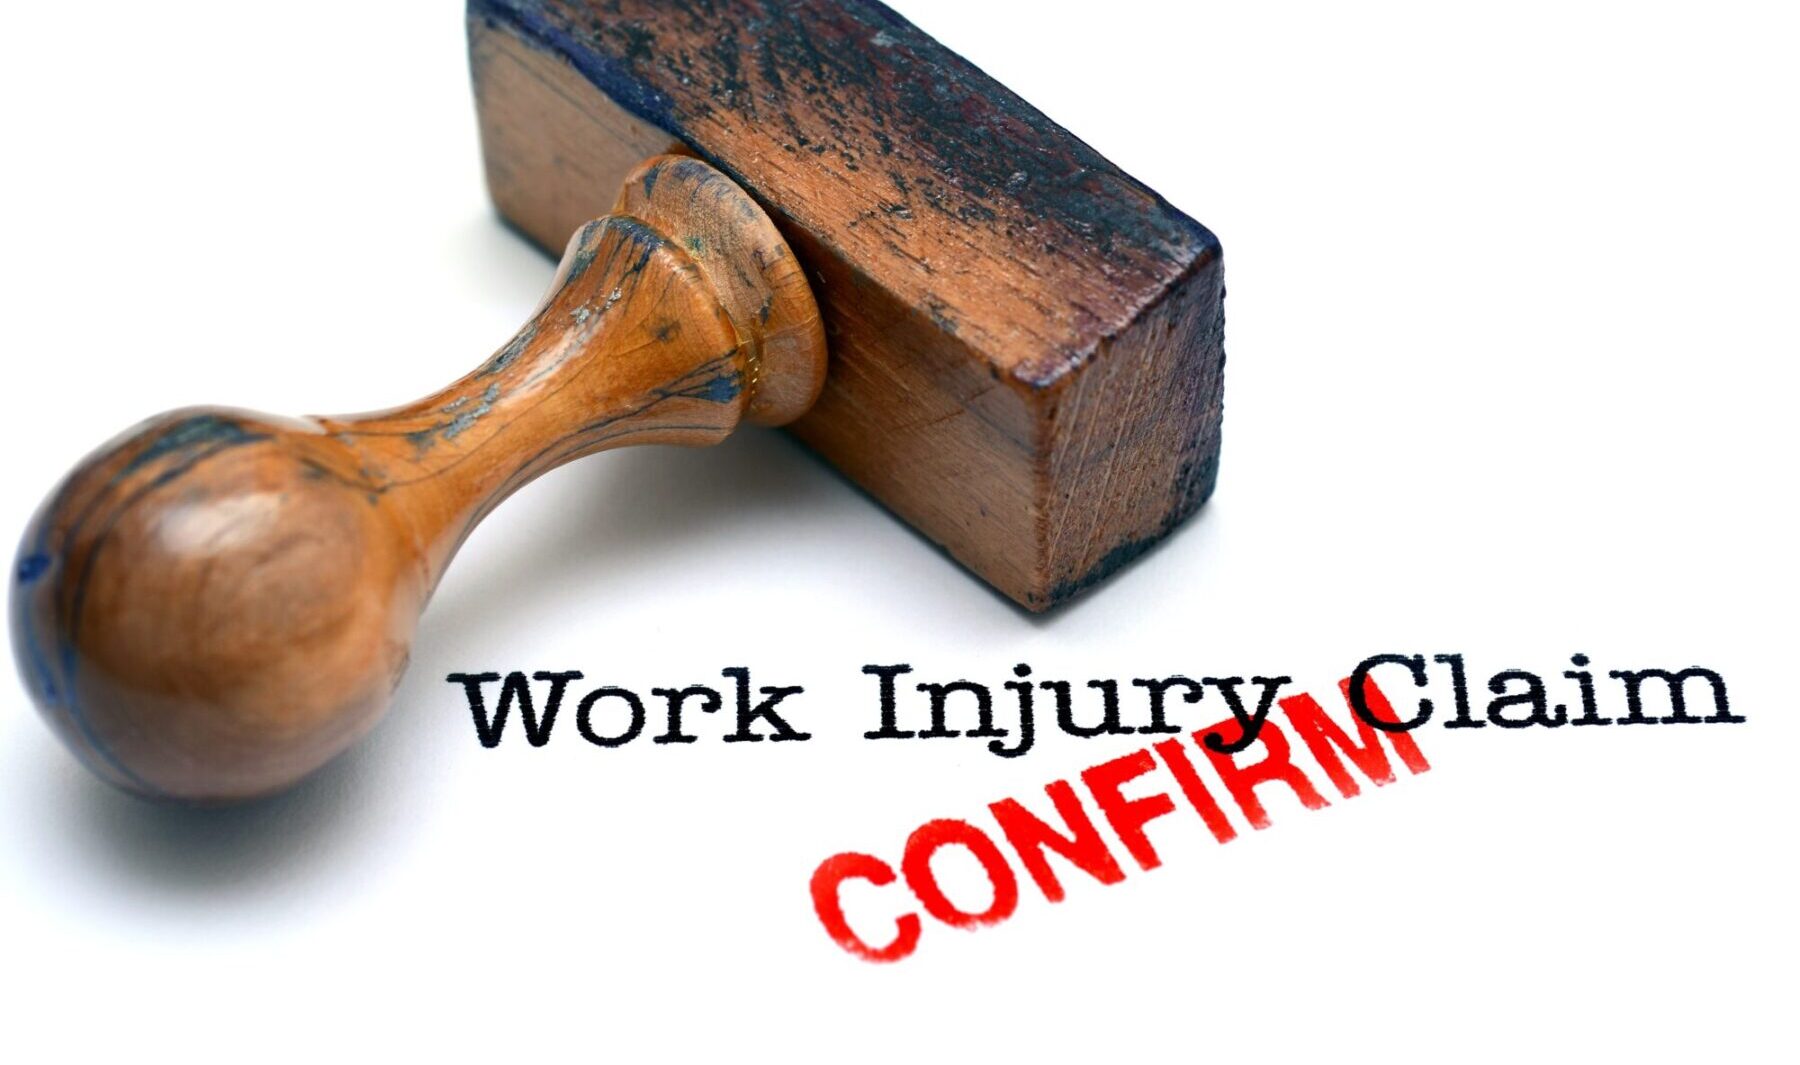 Work injury claim with confirm stamp when needing Workers' Compensation Claim Lawyer Chicago to review your claim